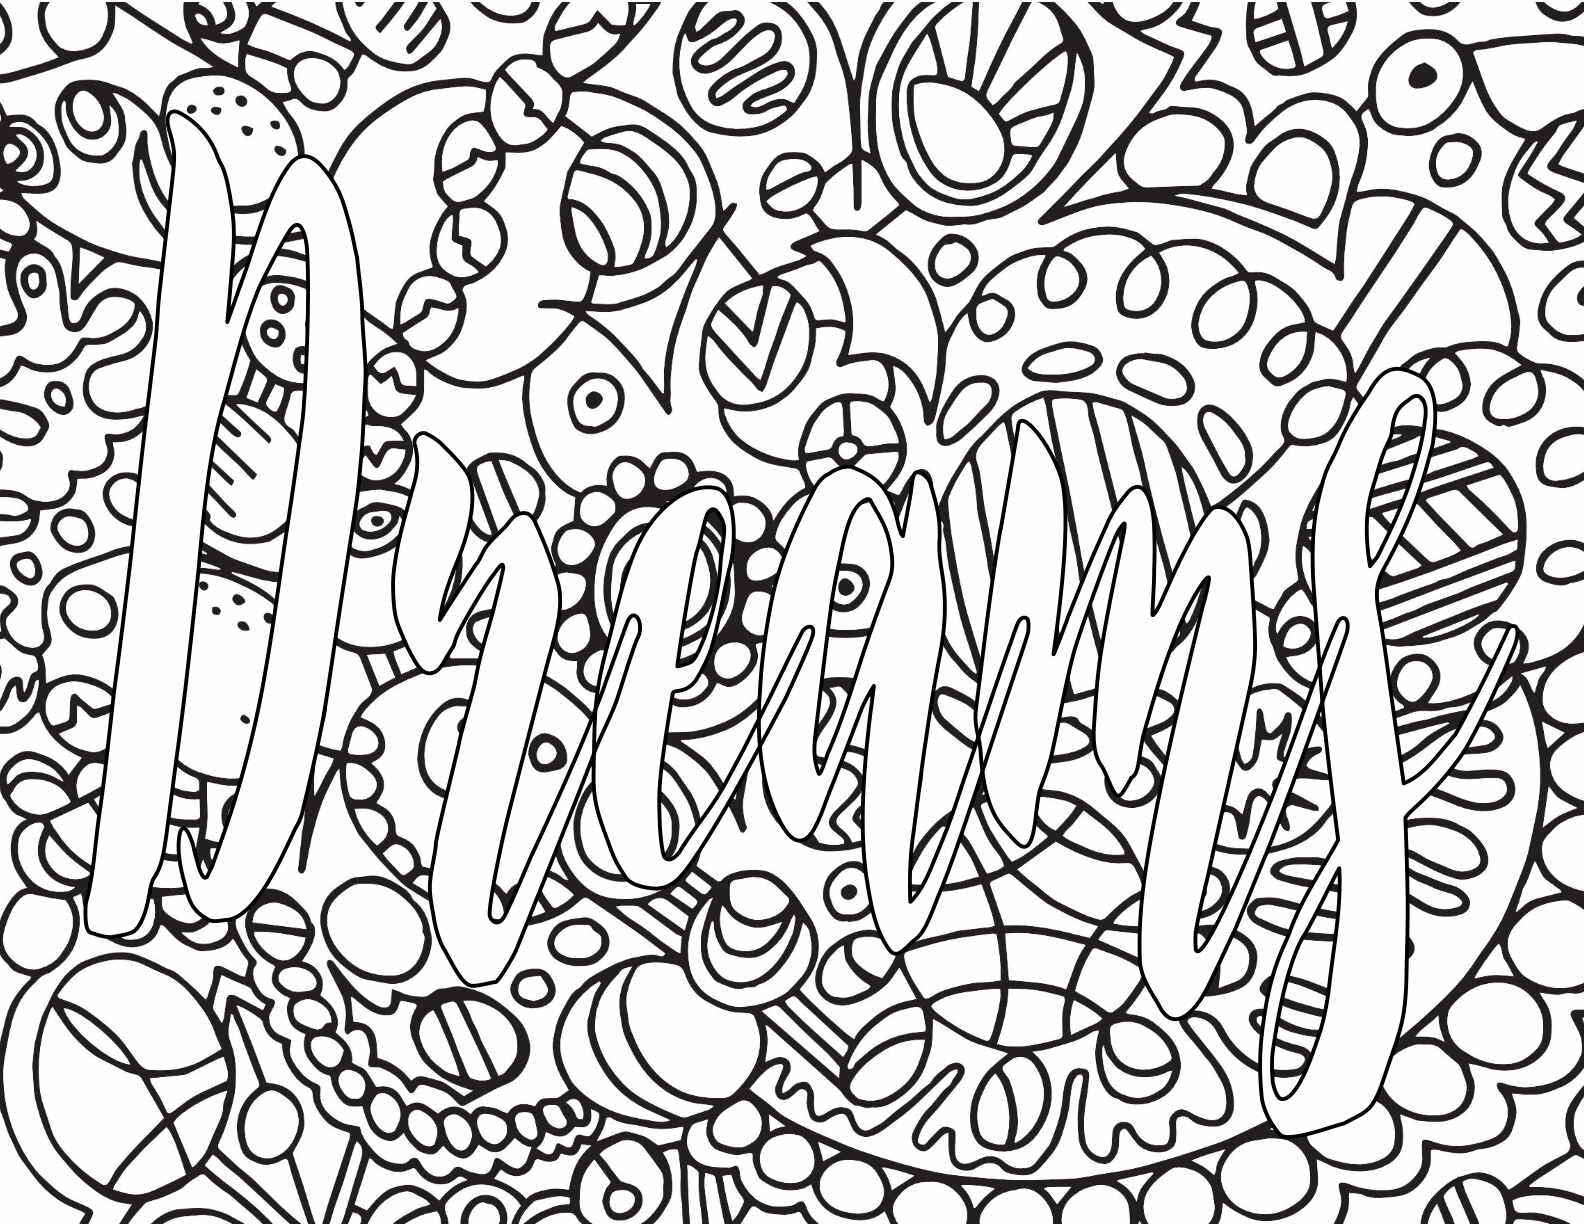 3 Free DREAMS Printable Coloring PagesCLICK HERE TO DOWNLOAD THE PAGE ABOVE